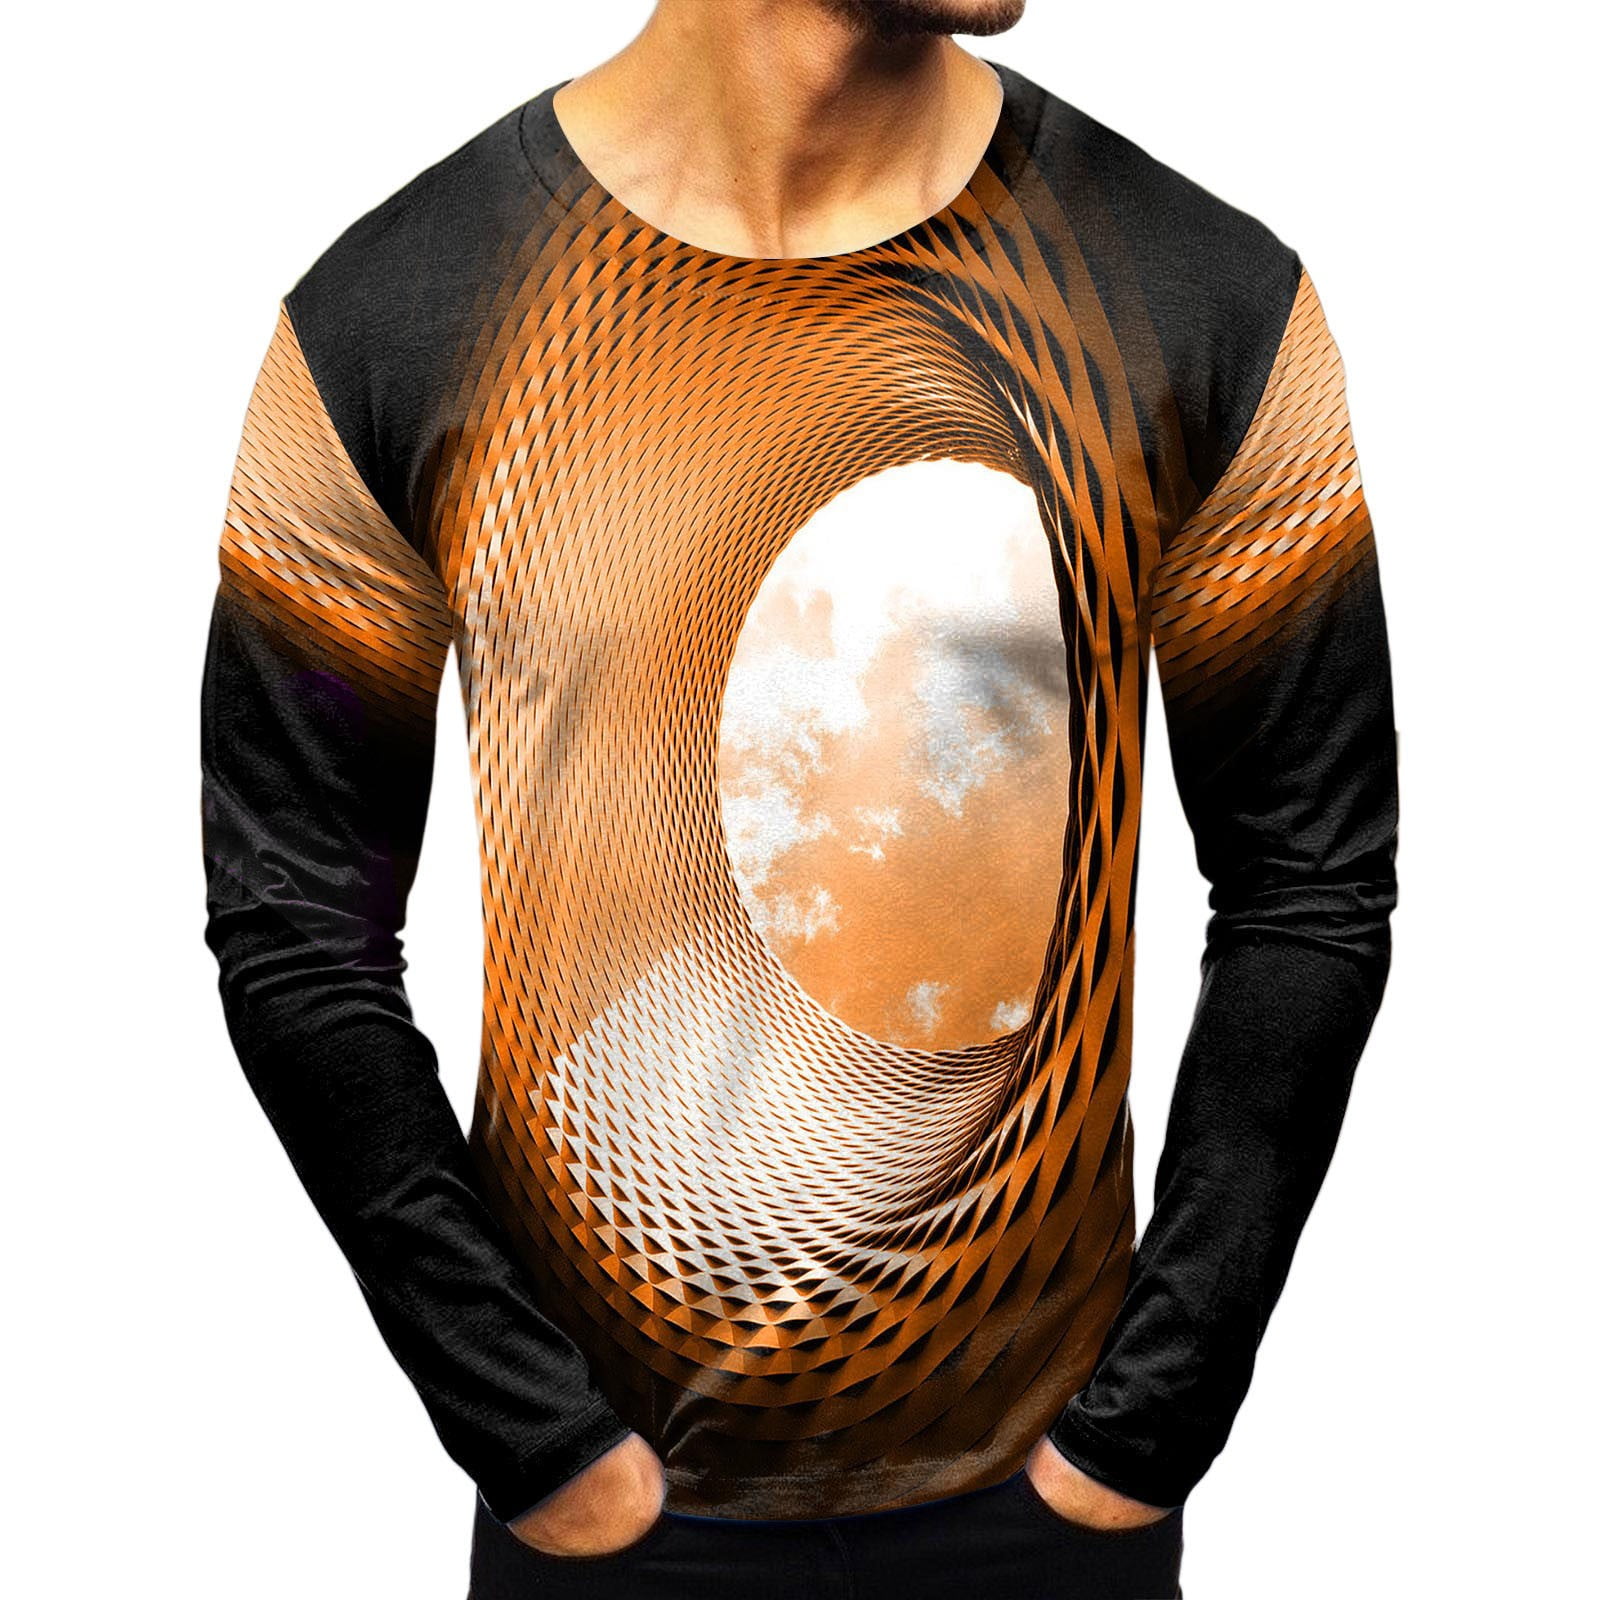 Red Compression Shirts For Men Mens Fashion Casual Sports Abstract Digital  Printing Round Neck T Shirt Long Sleeve Top